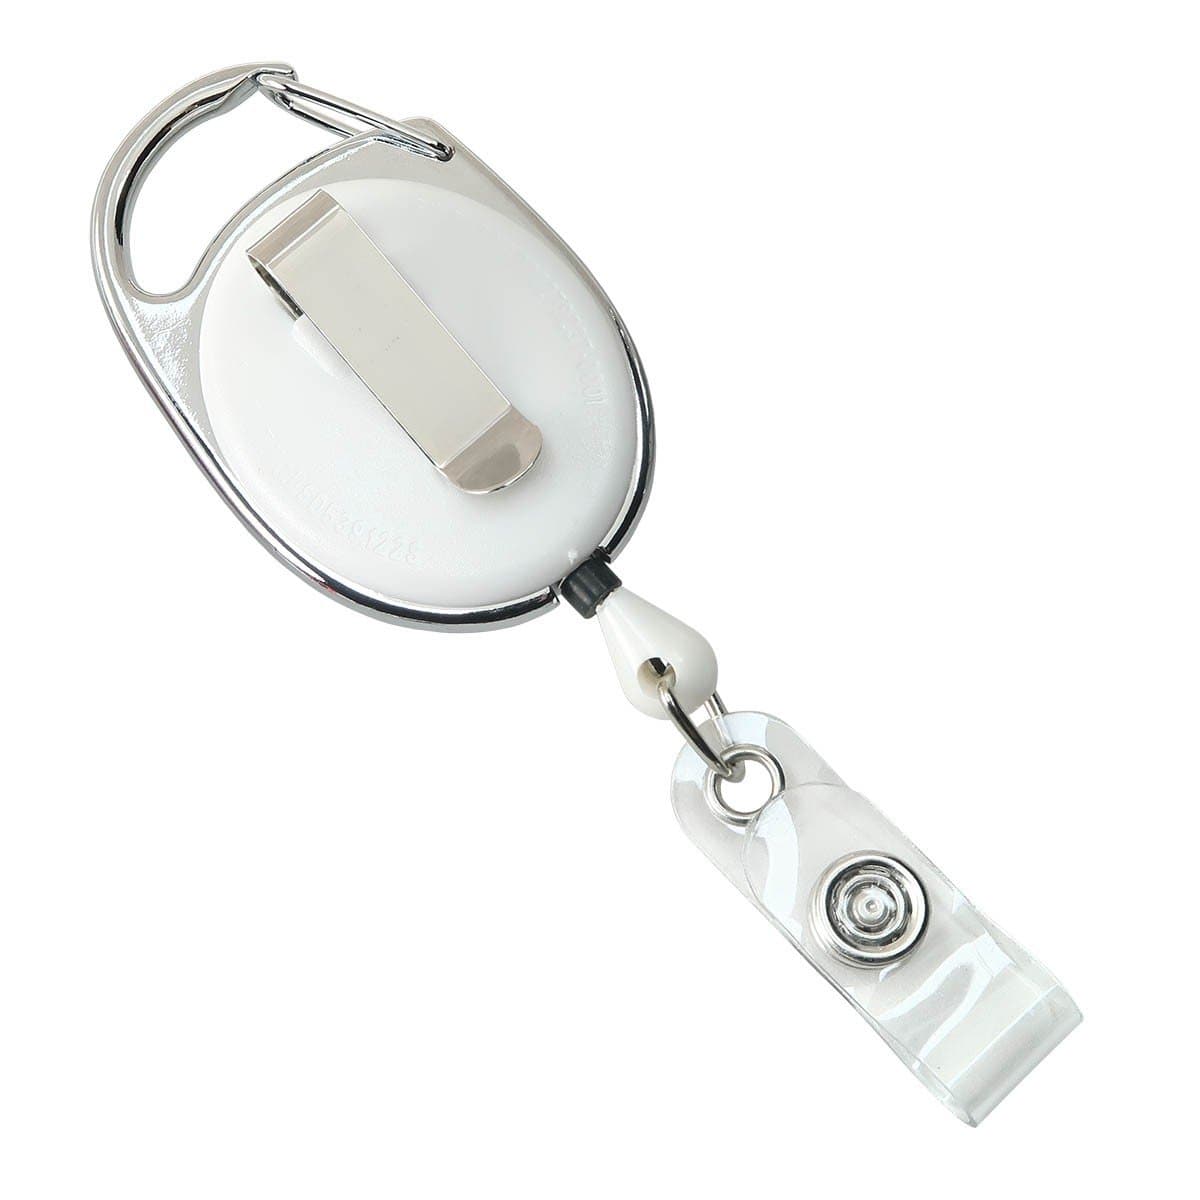 Premium Oval Badge Reel with Carabiner and Belt Clip (P/N 2120